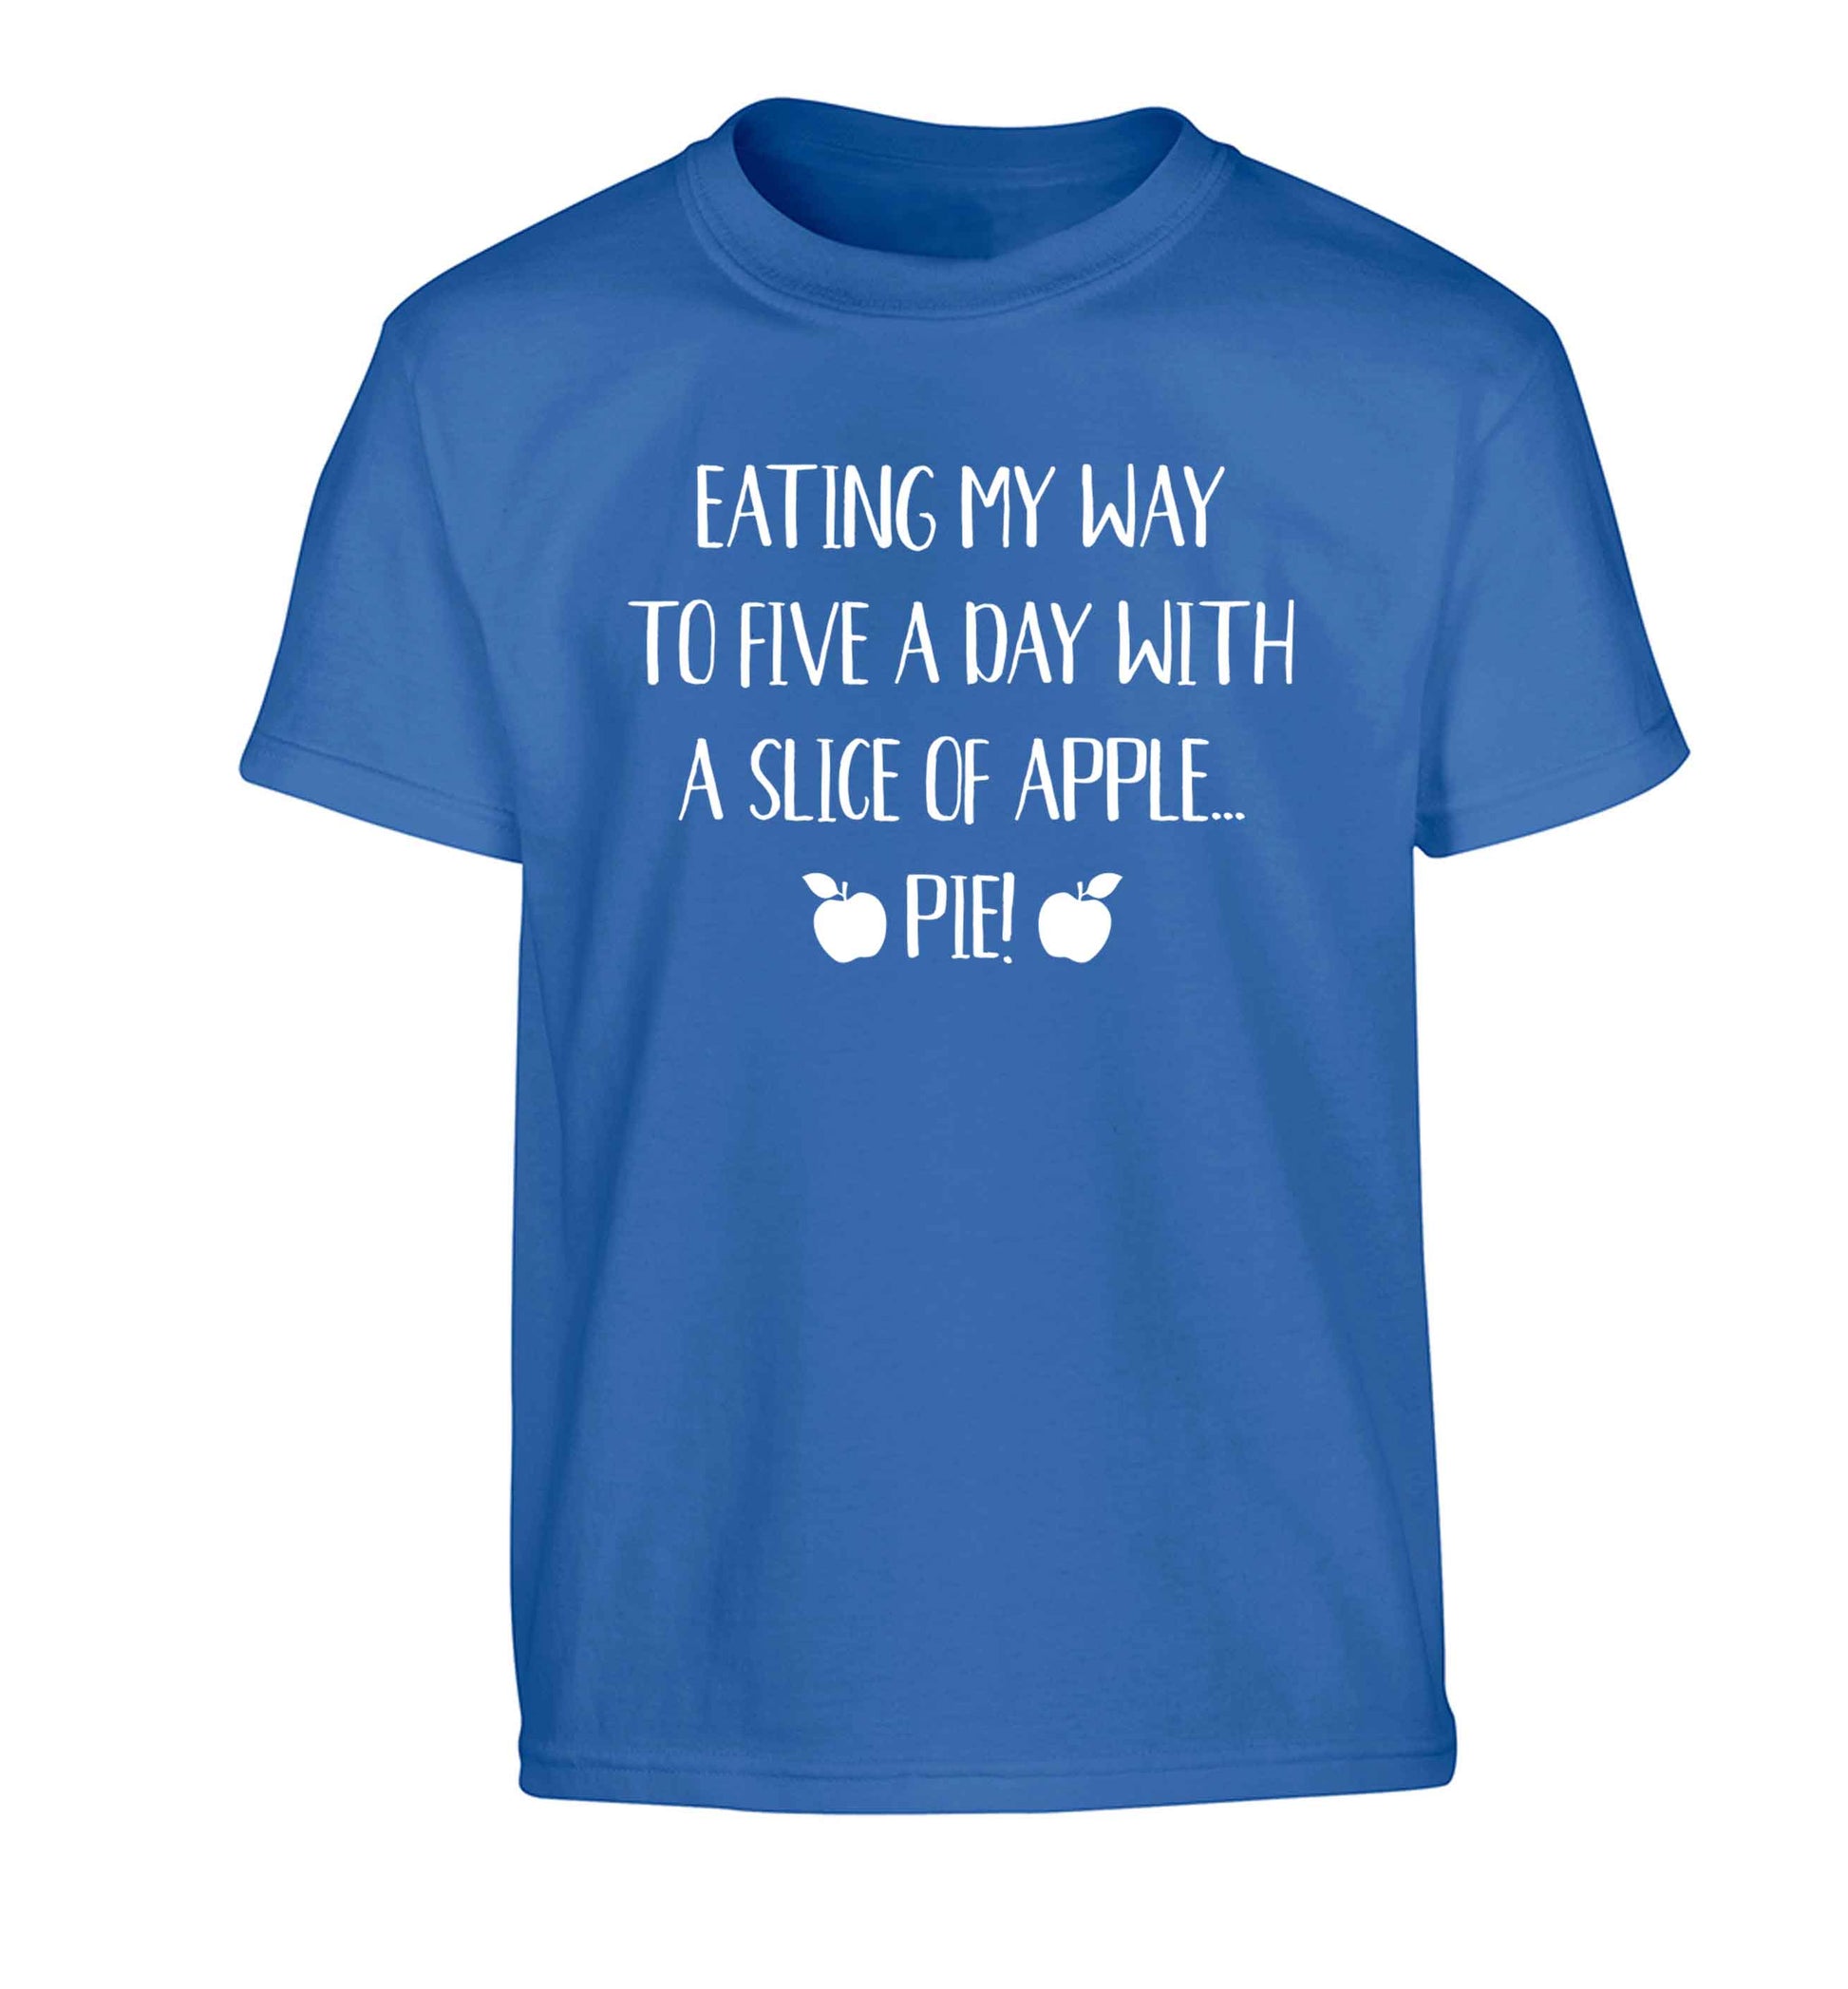 Eating my way to five a day with a slice of apple pie Children's blue Tshirt 12-13 Years